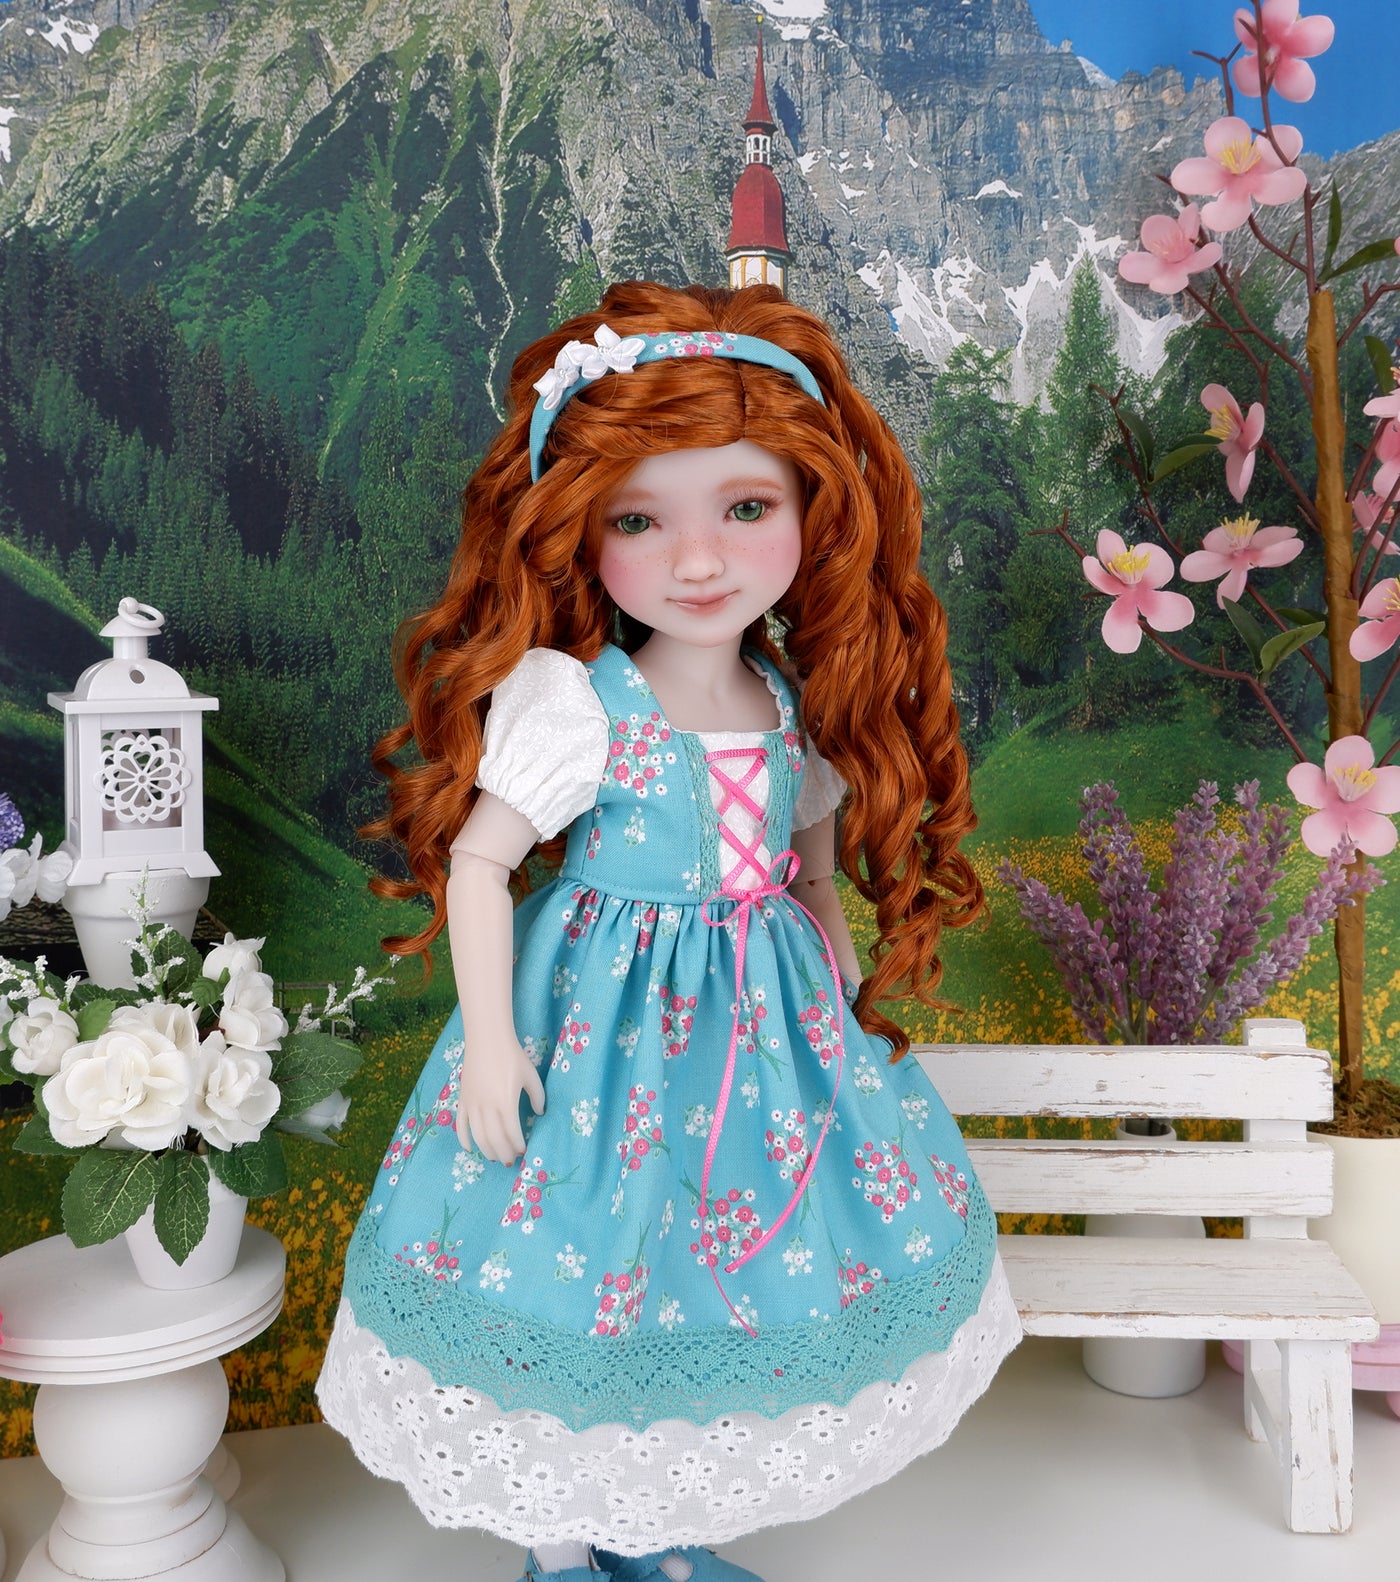 Alpine Posy - dirndl dress ensemble with shoes for Ruby Red Fashion Friends doll